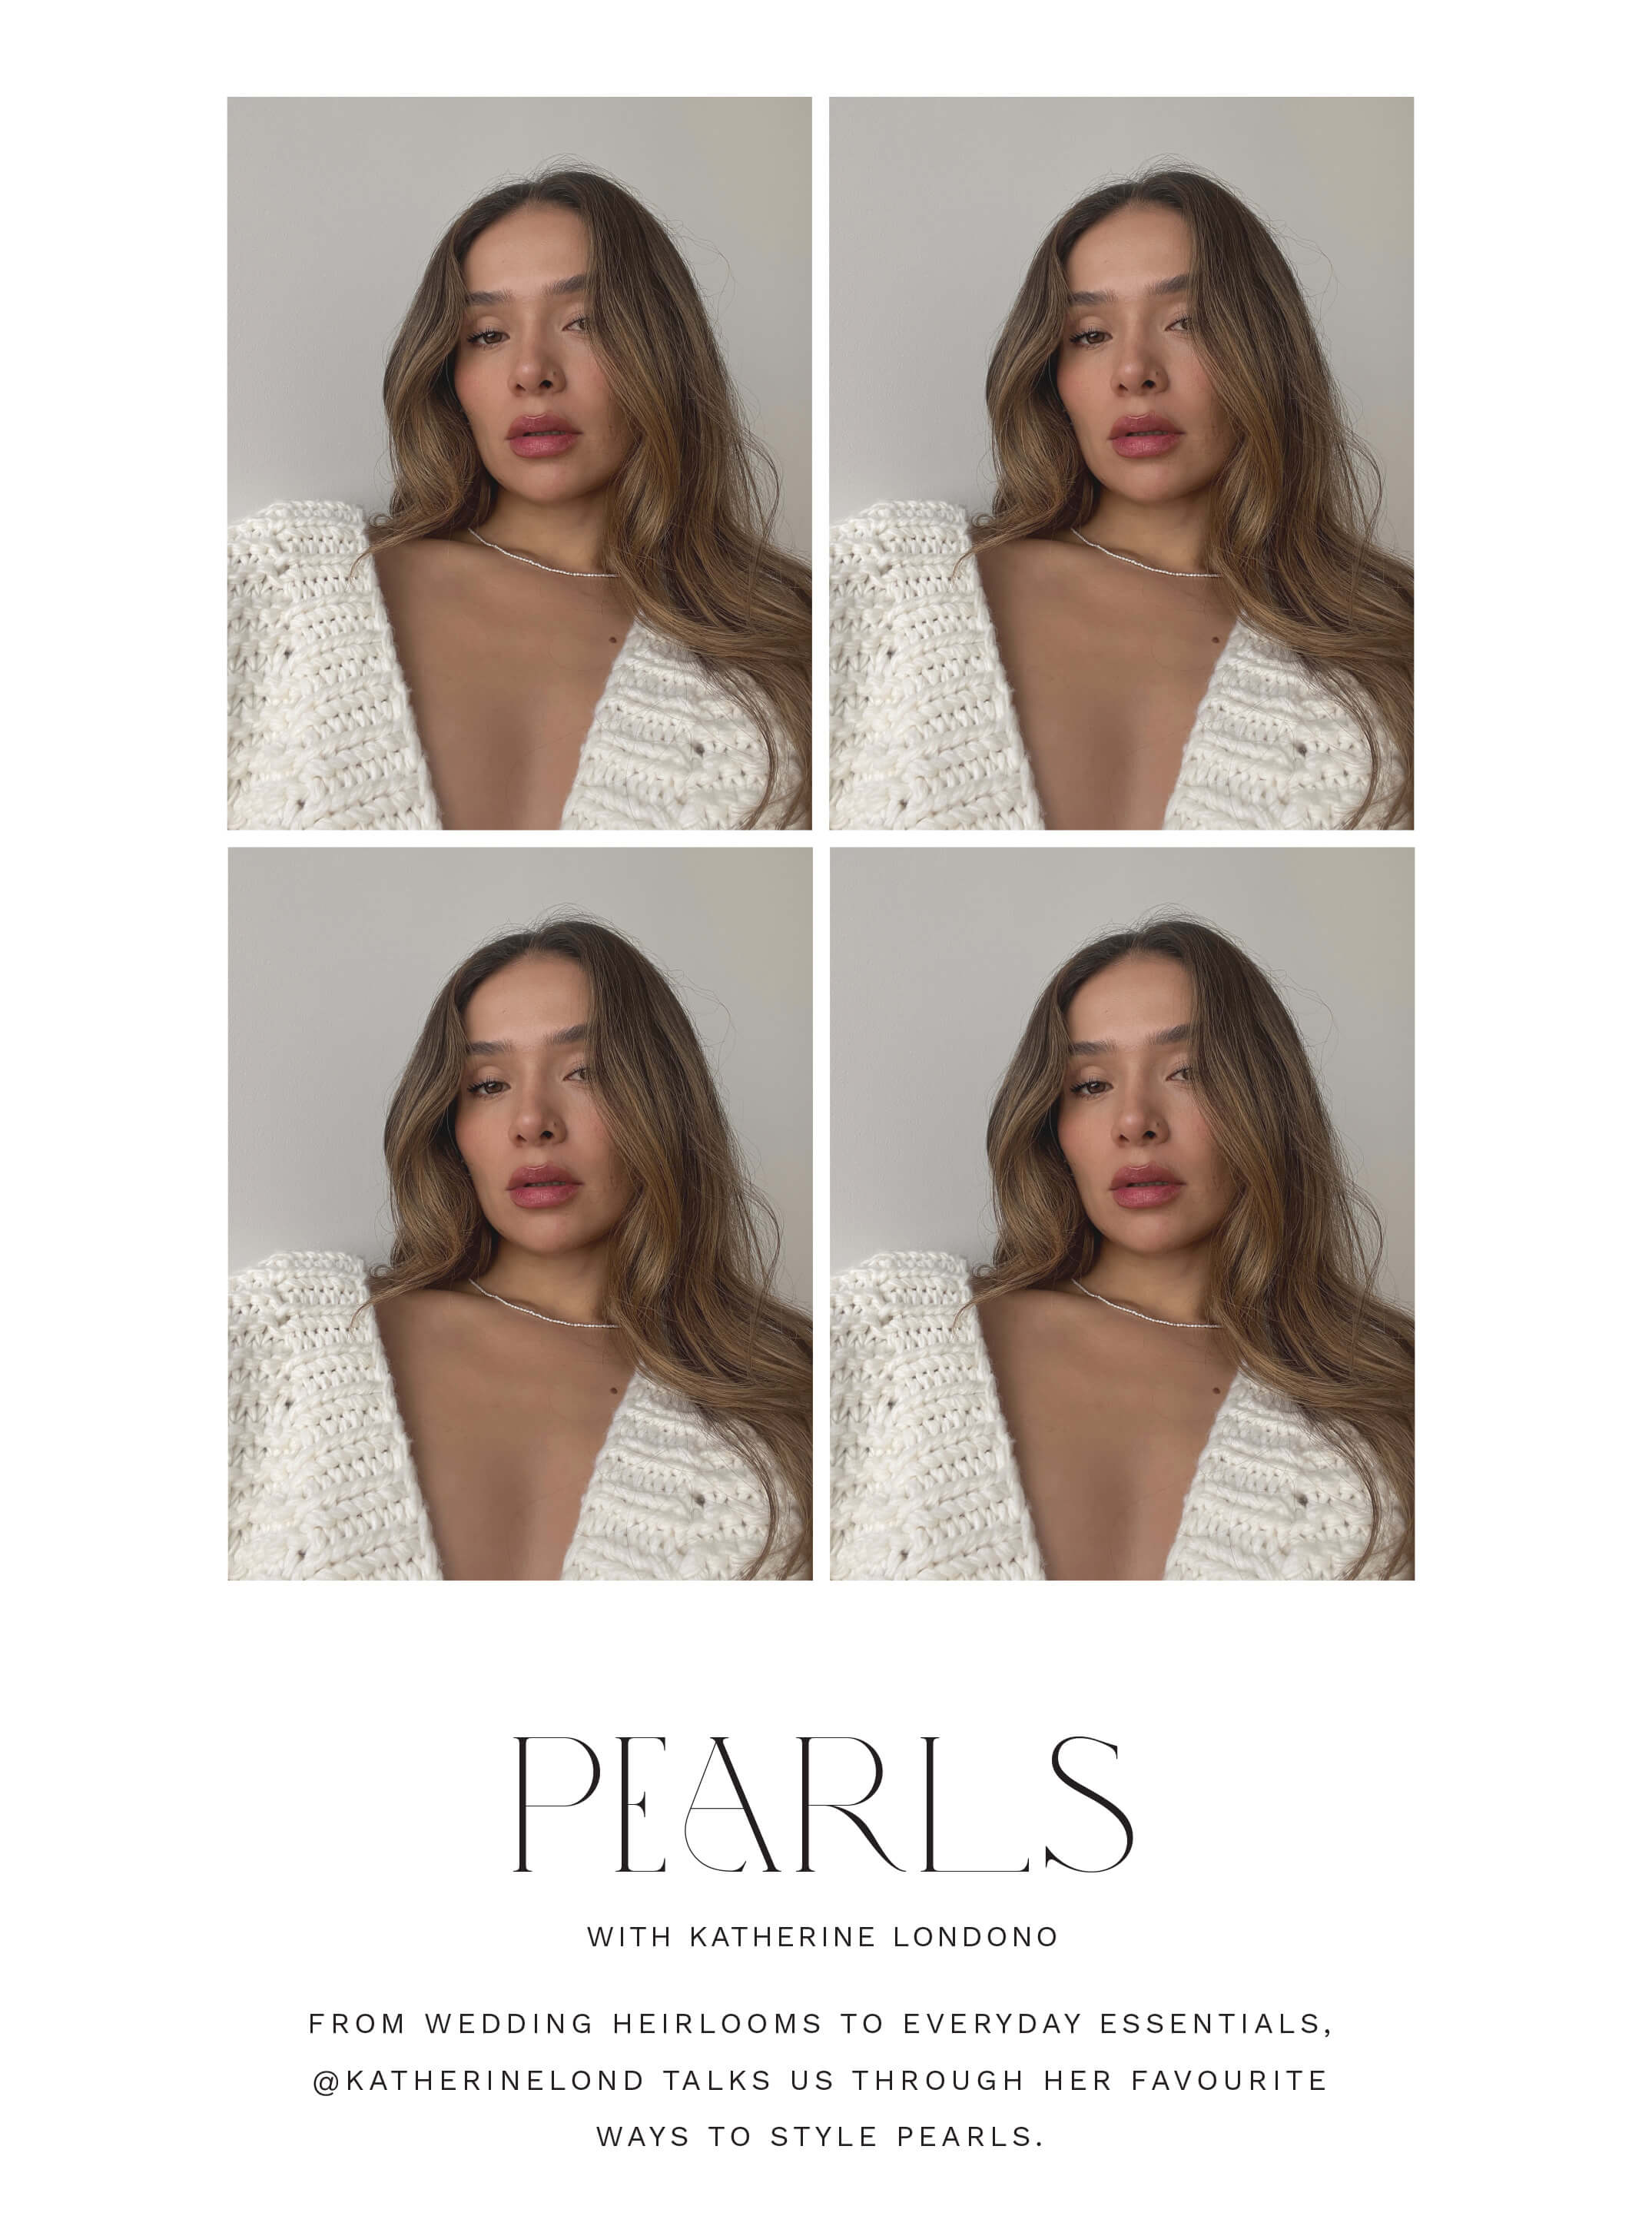 Styling pearl jewellery with influencer Katherine Londono